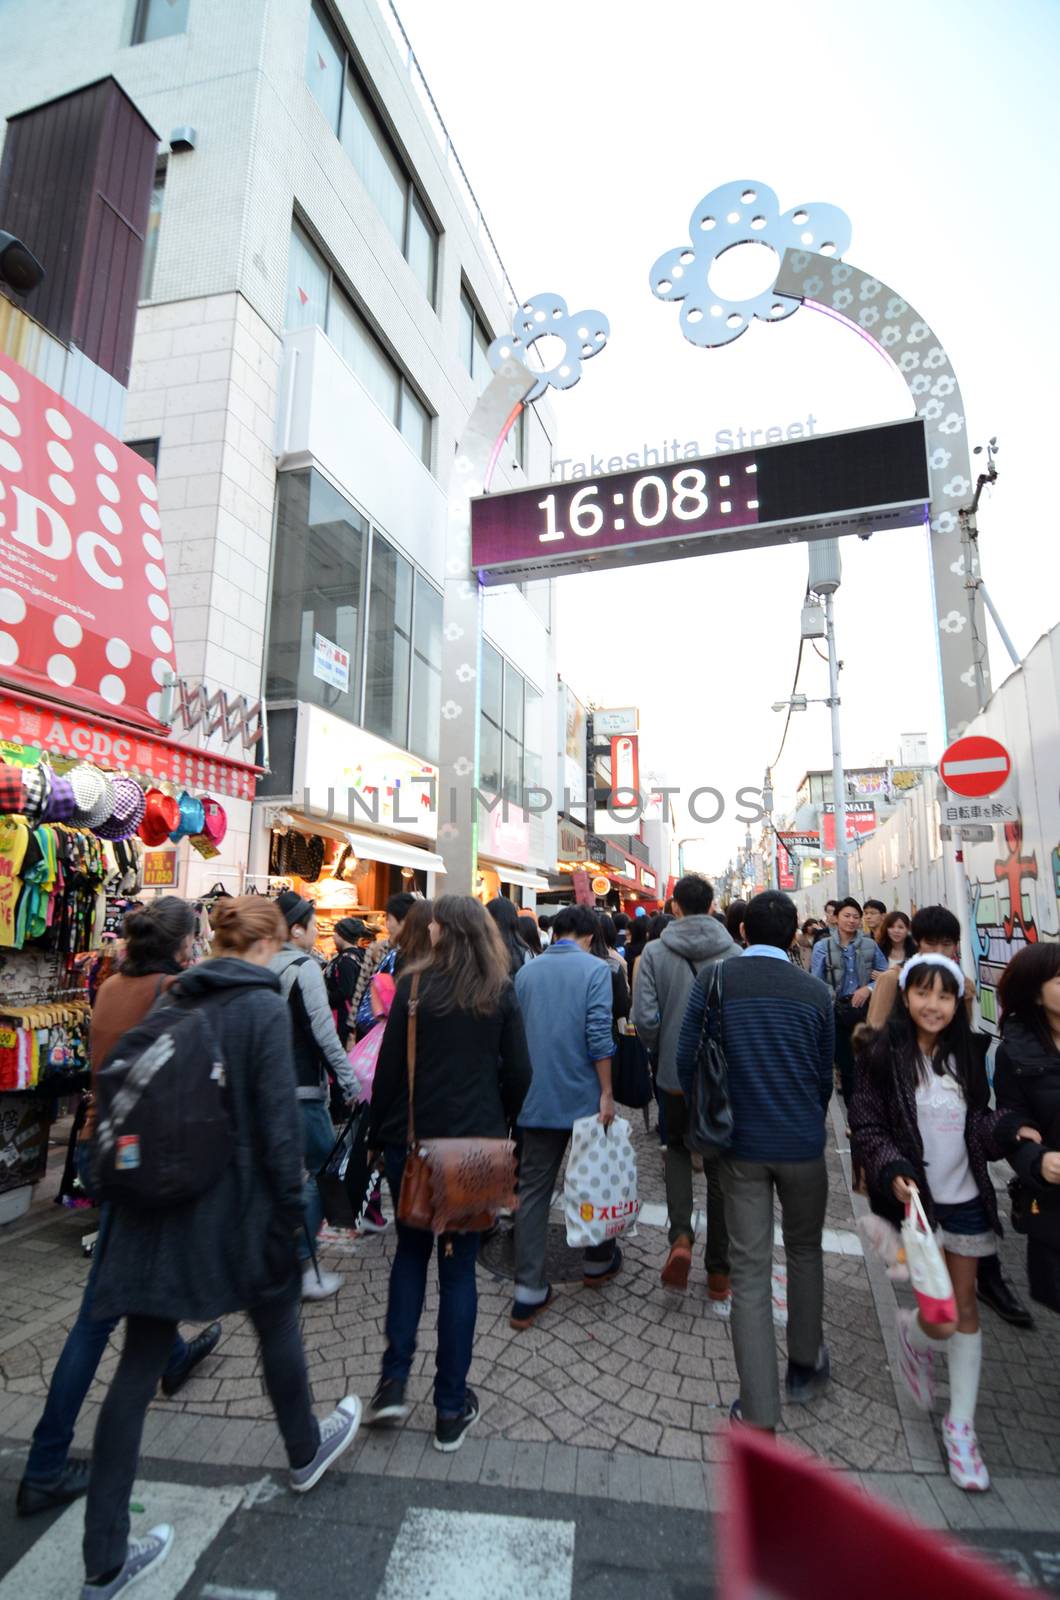 Tokyo, Japan - November 24, 2013: Crowd at Takeshita street Harajuku on November 24, 2013 in Tokyo, Japan. Takeshita street is a street lined with fashion, cafes and restaurants in Harajuku. 